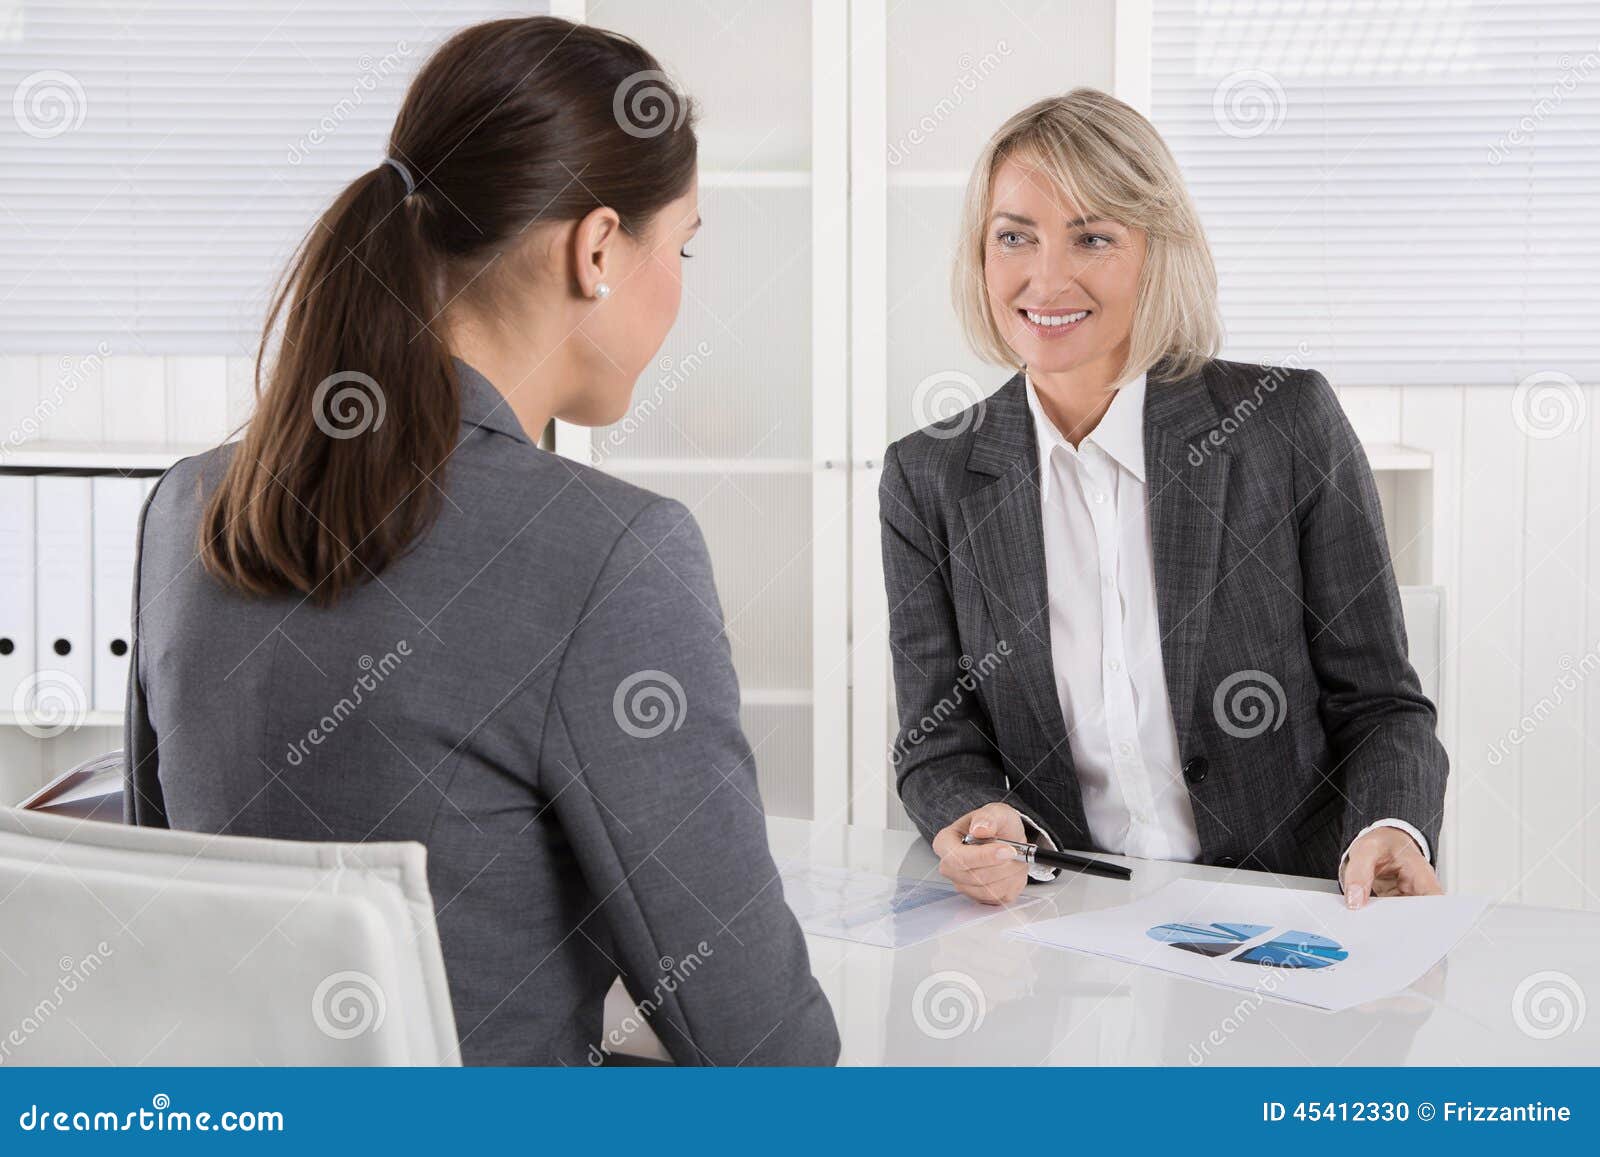 two business woman sitting at desk: customer and adviser talking